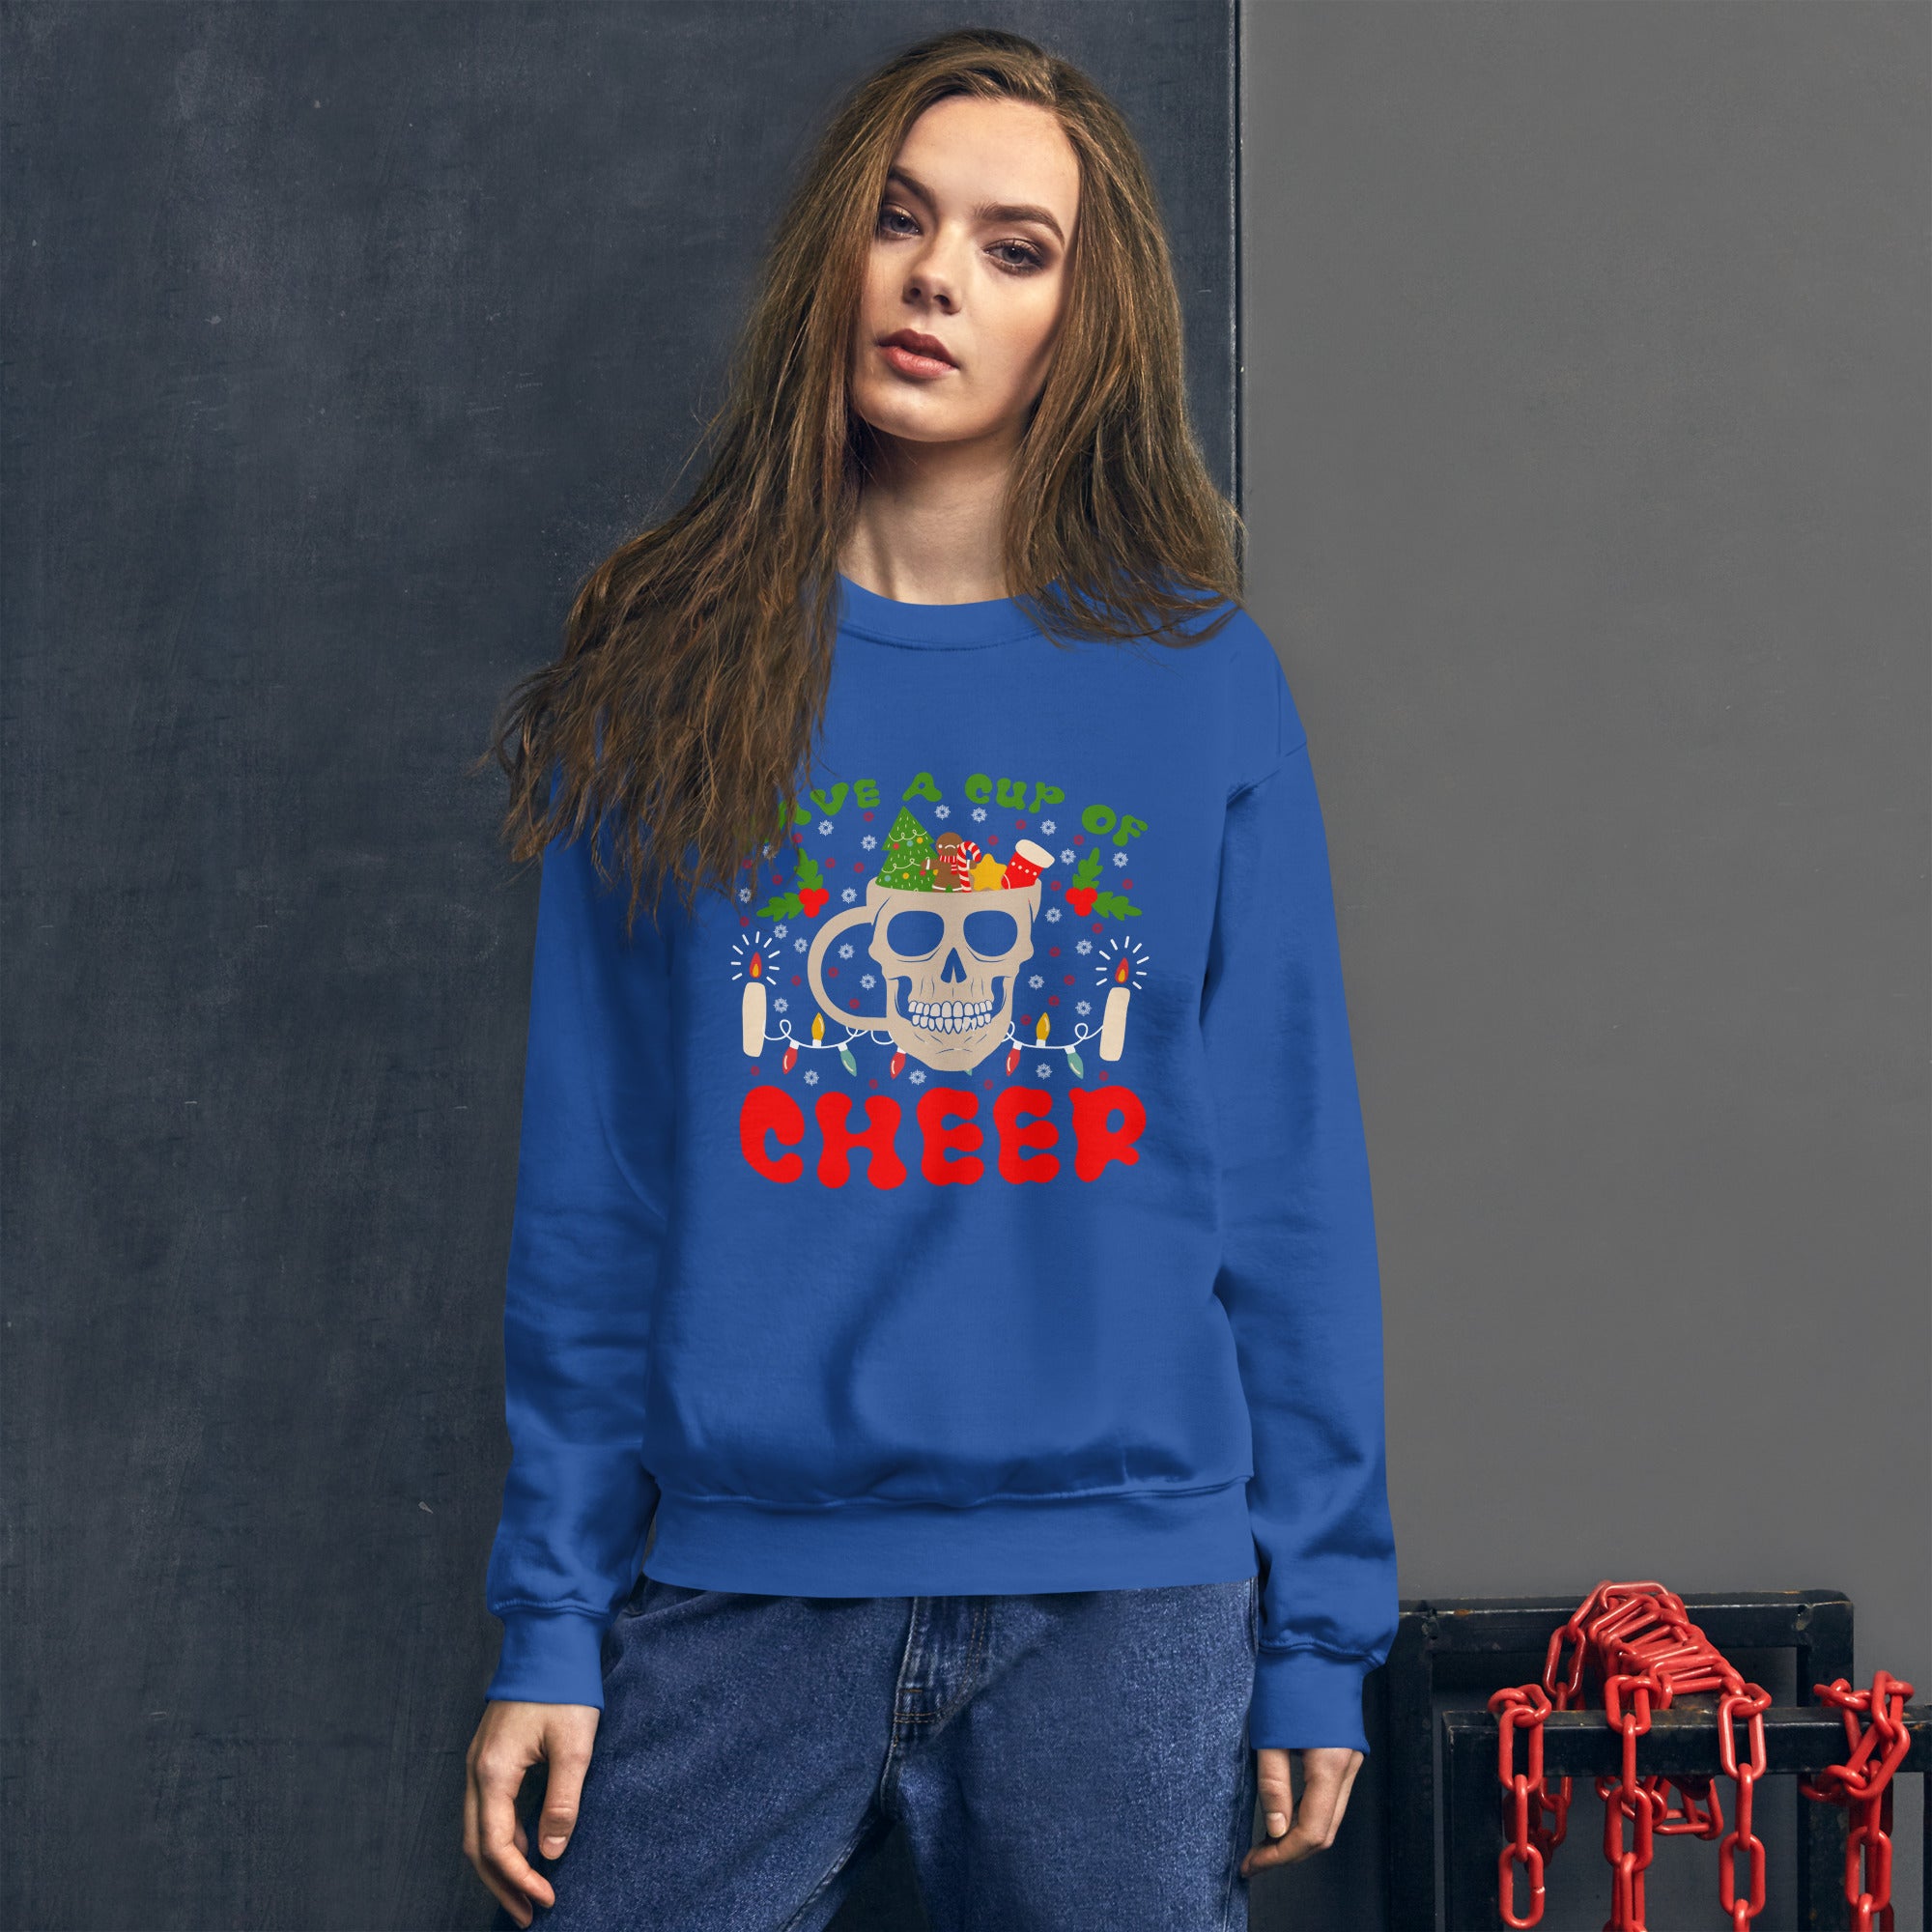 Have A Cup Of Cheer Christmas Skeleton Women's Sweatshirt Coffee Lover Funny Holiday Festive Skull Xmas Women's Jumper